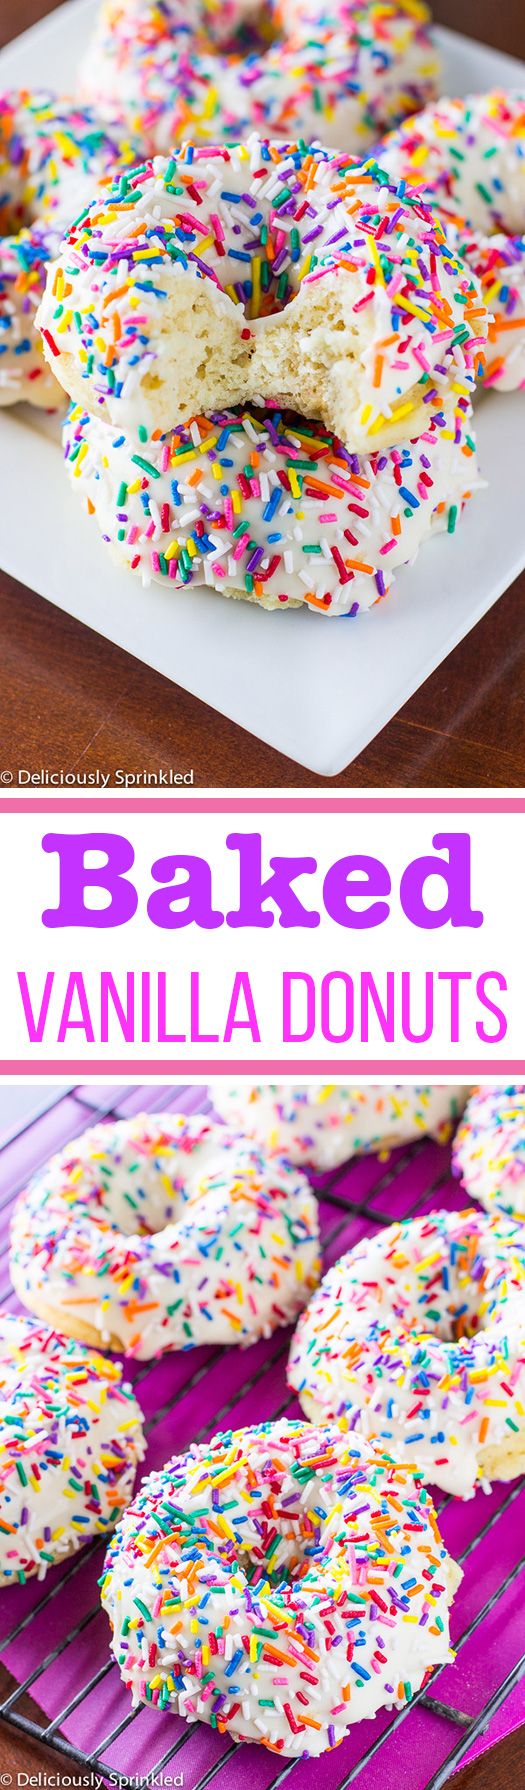 THE BEST BAKED VANILLA DONUTS